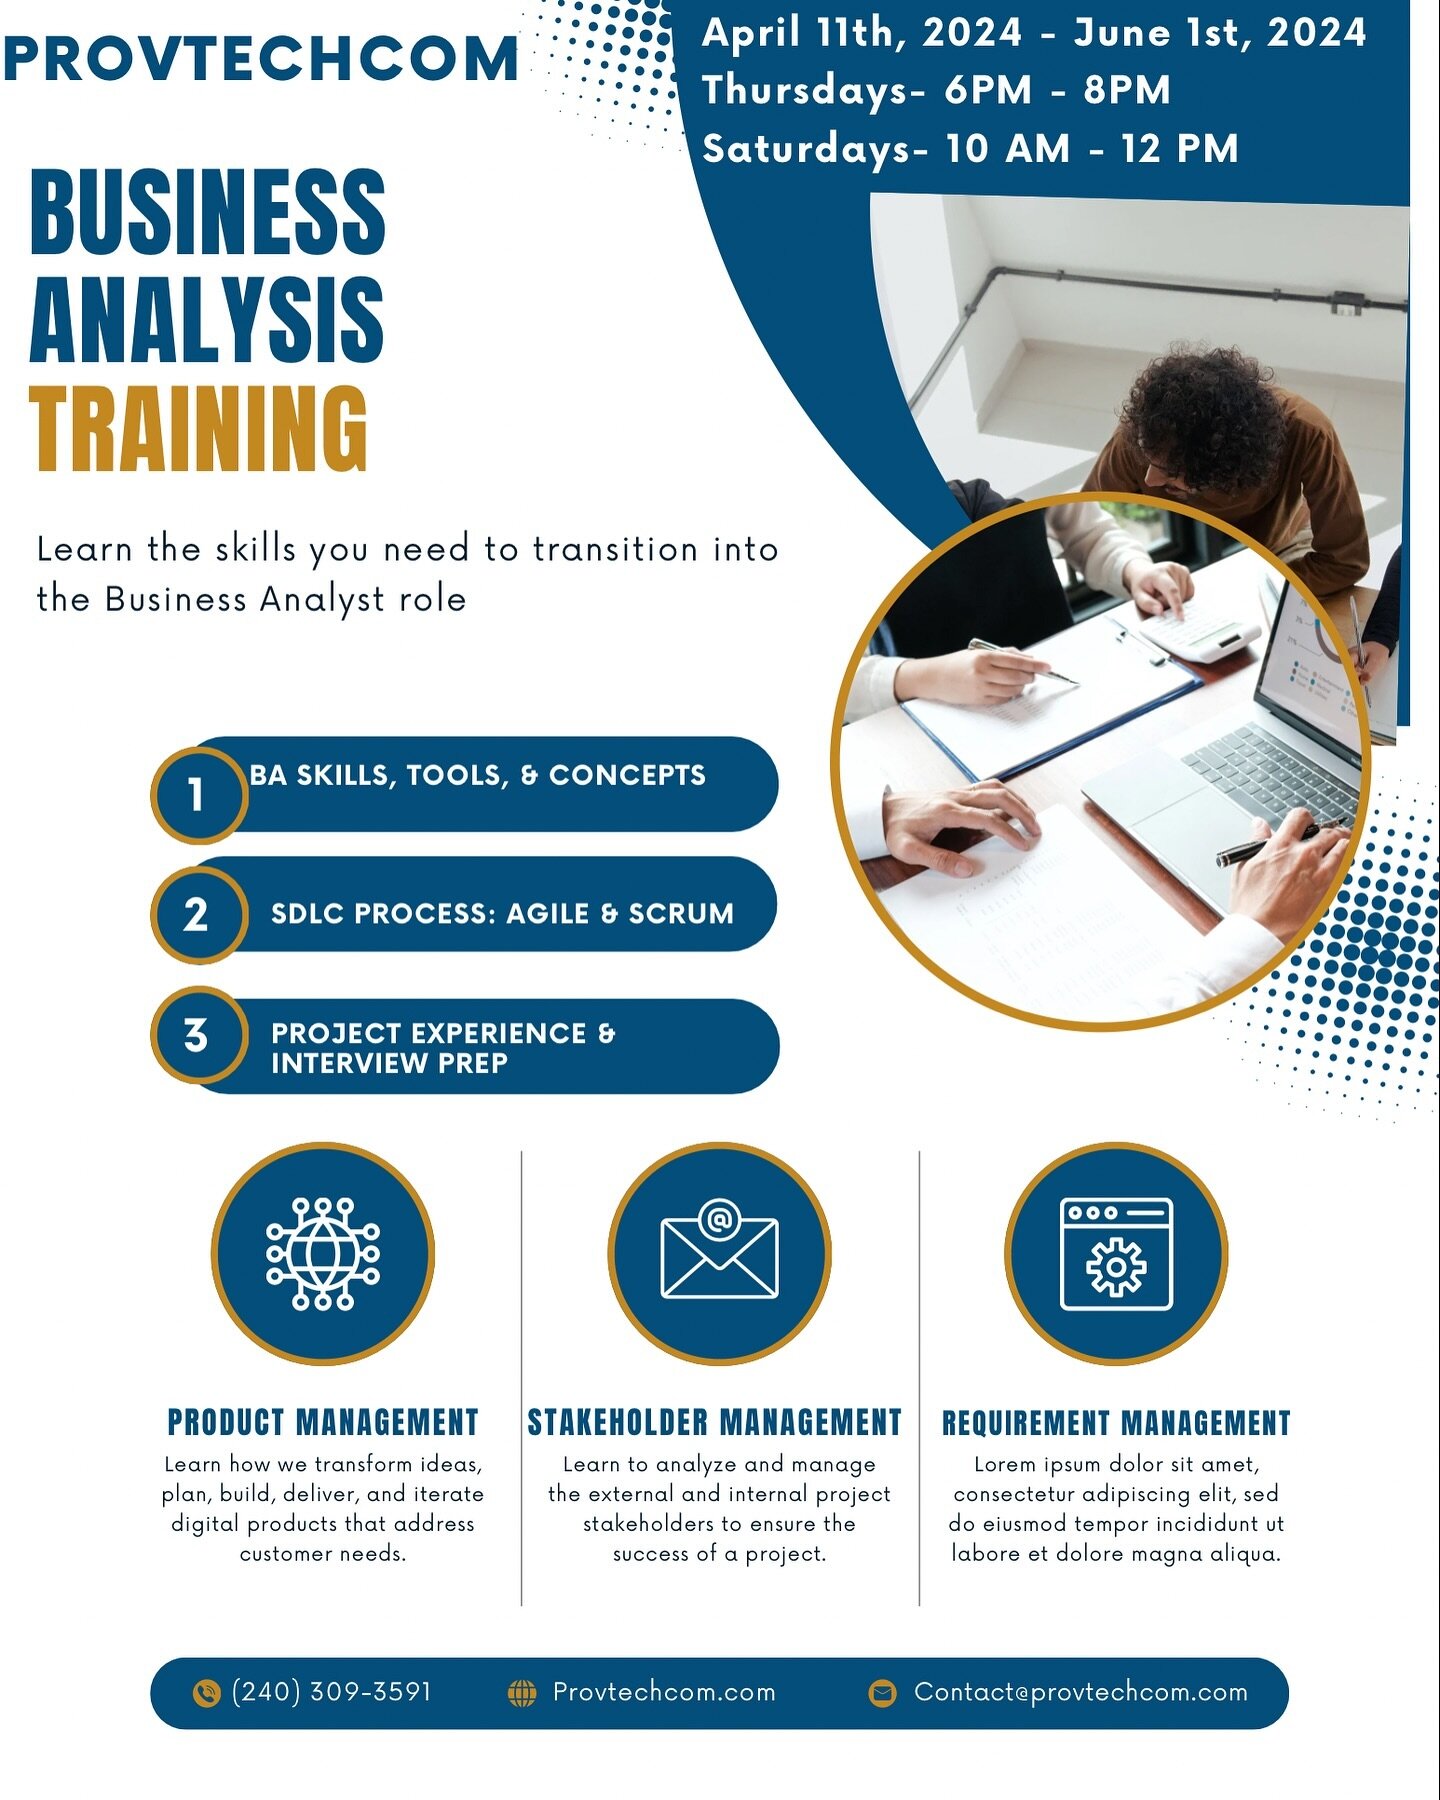 BA Training starts April 11th 2024! The job market has changed, so we have made adjustments to ensure your are ready to navigate these times. Registration ends April 9th. Sign up and take the next steps to making that career change!

#businessanalyst